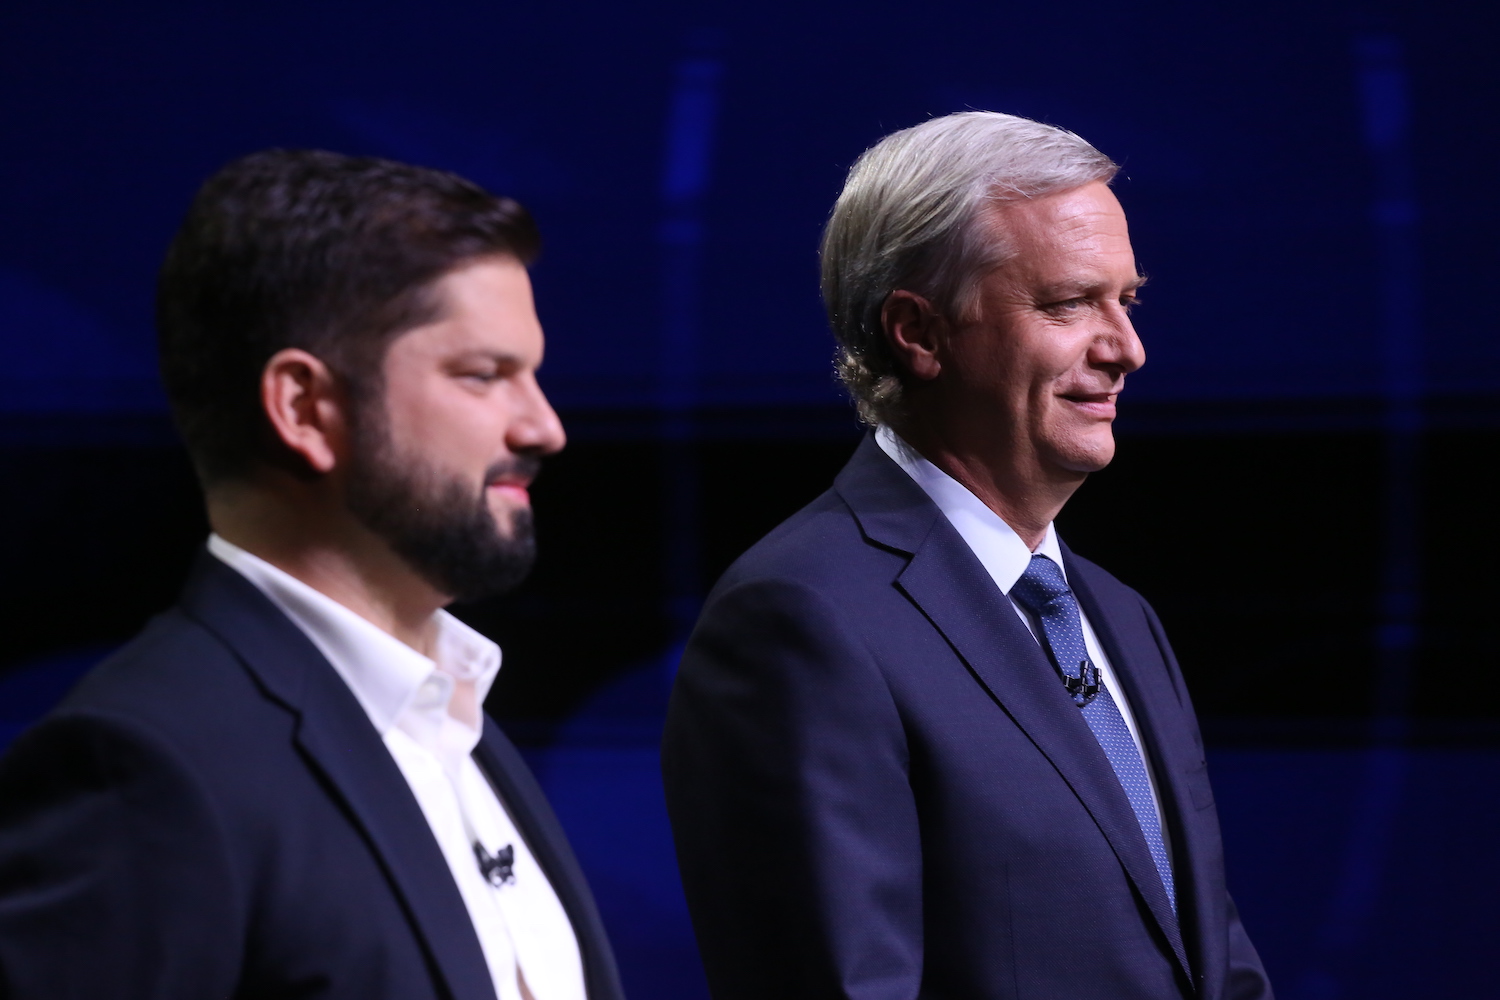 President elect Gabriel Boric of the Social Convergence party and Republican Party candidate José Antonio Kast pose before a presidential debate in Santiago, Chile, on Dec. 13.